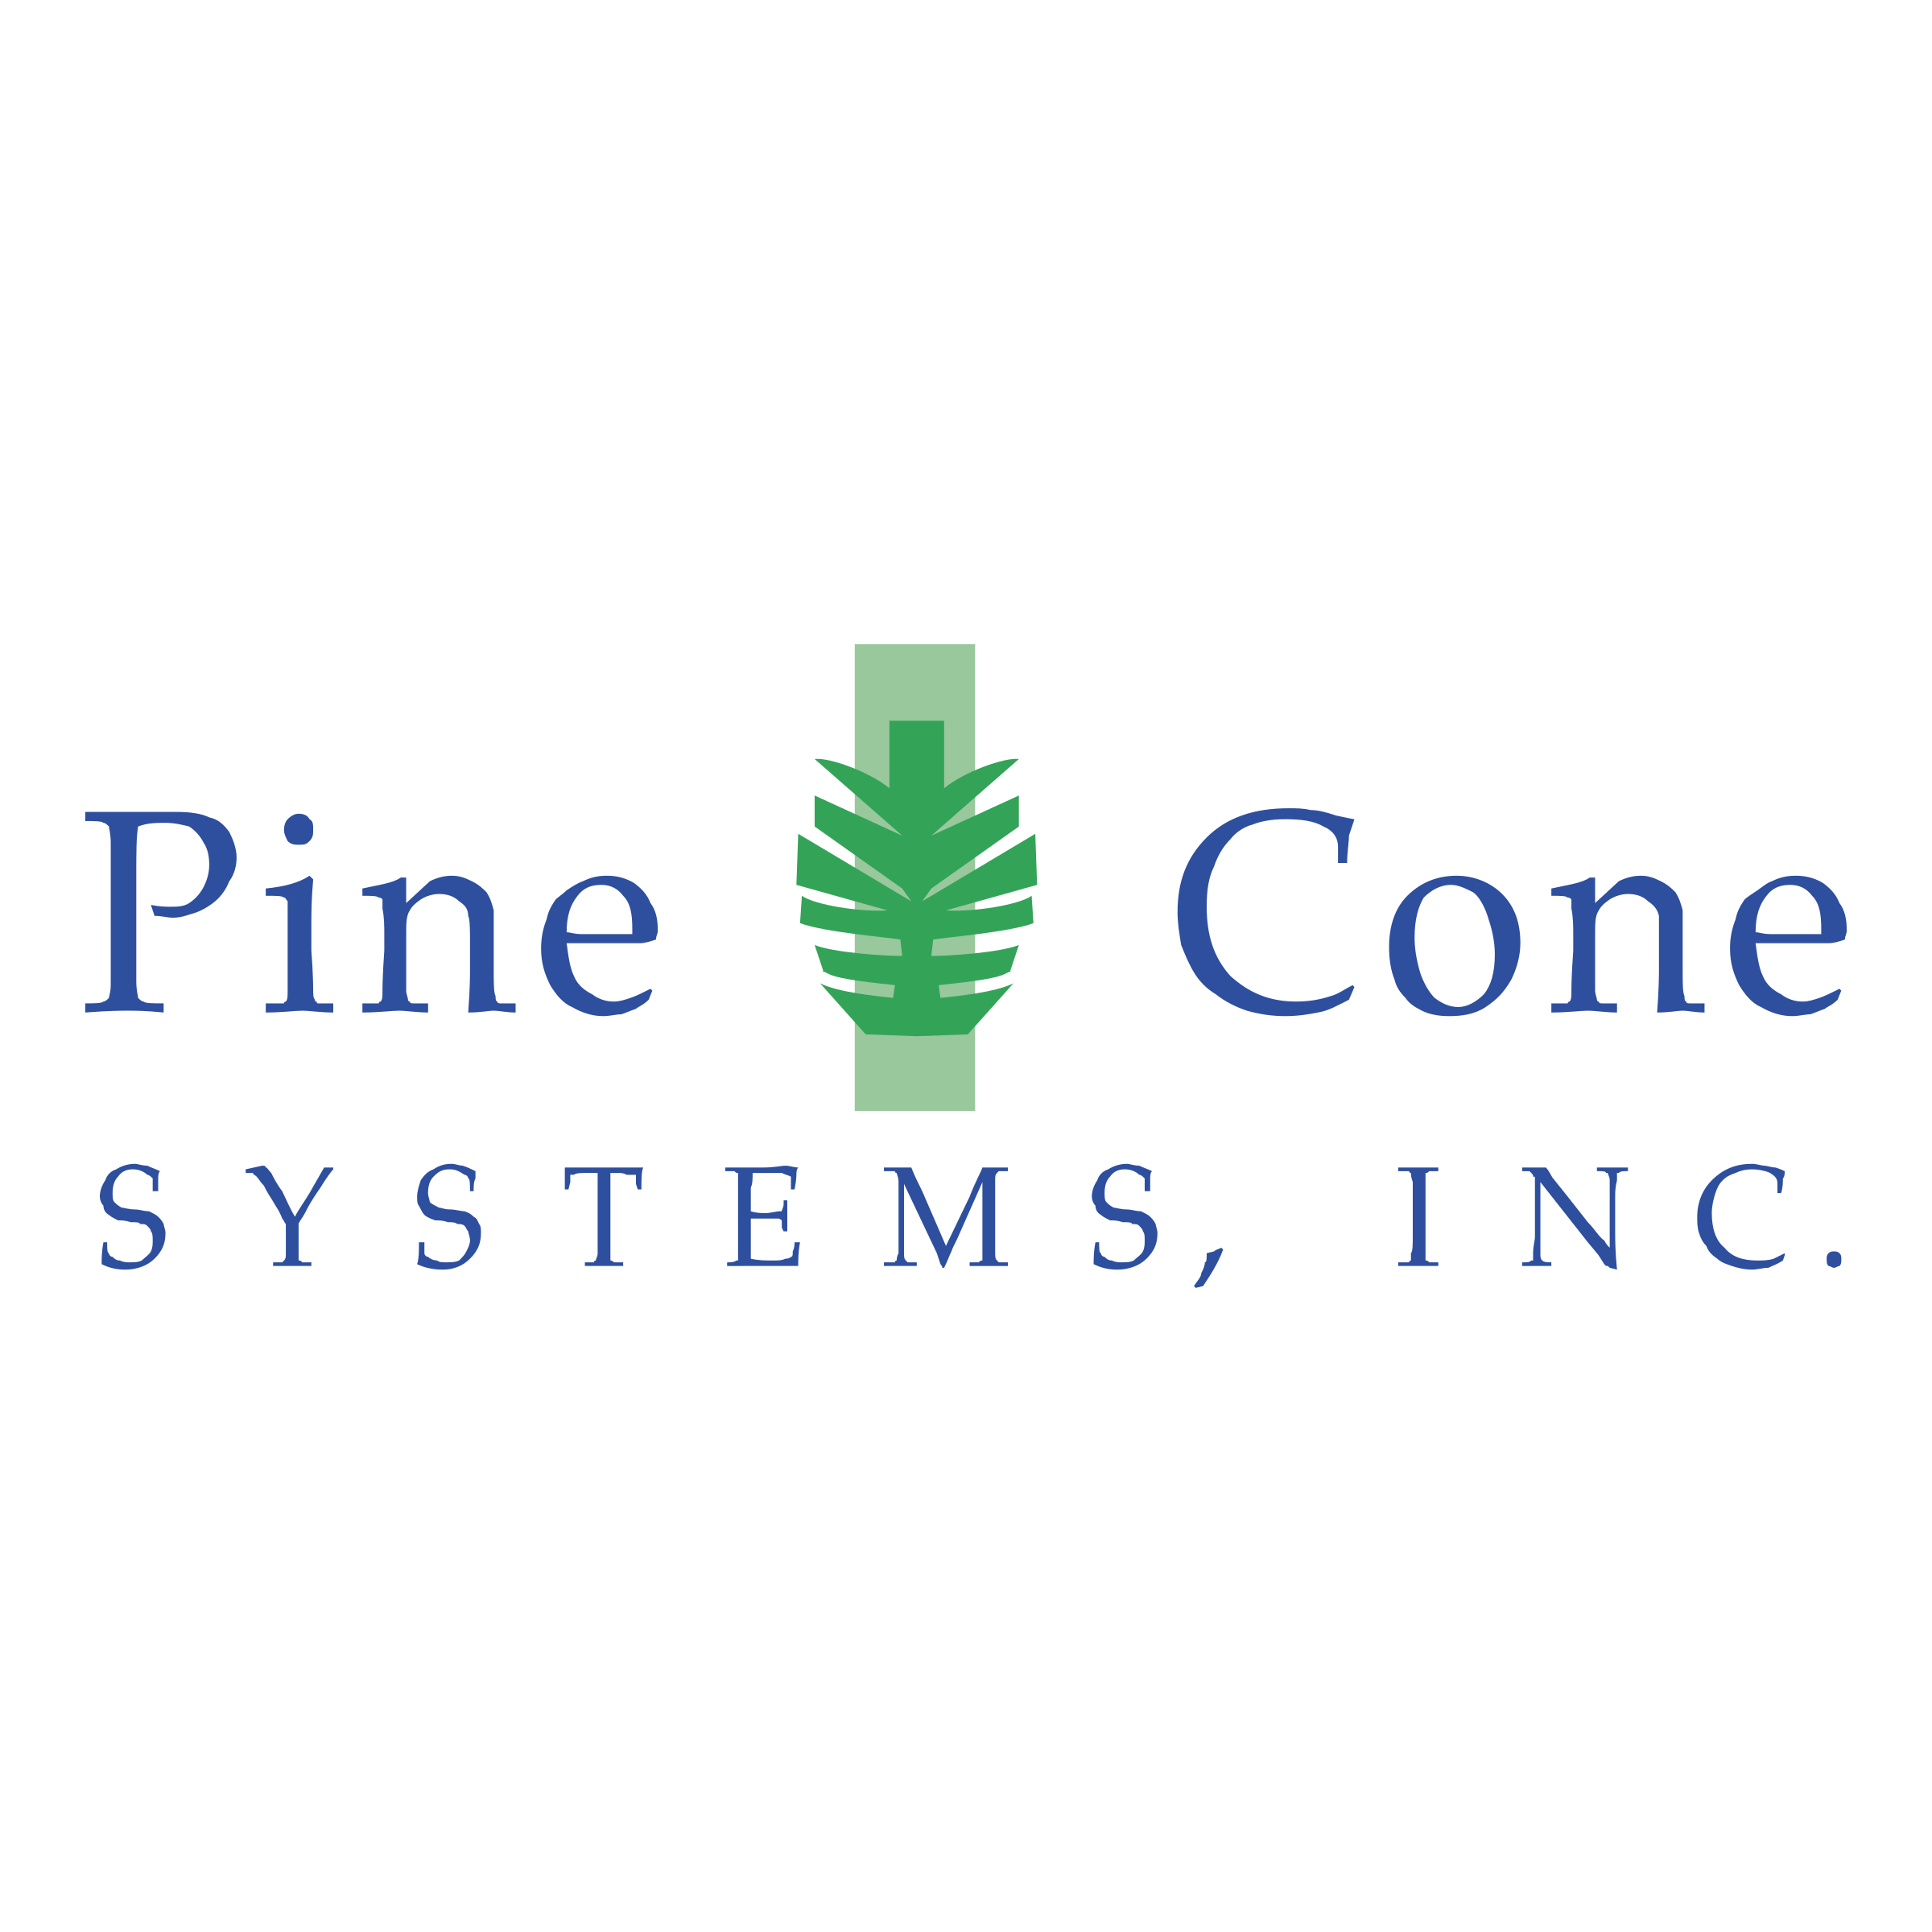 Cone Logo - Pine Cone Systems Logo PNG Transparent & SVG Vector - Freebie Supply